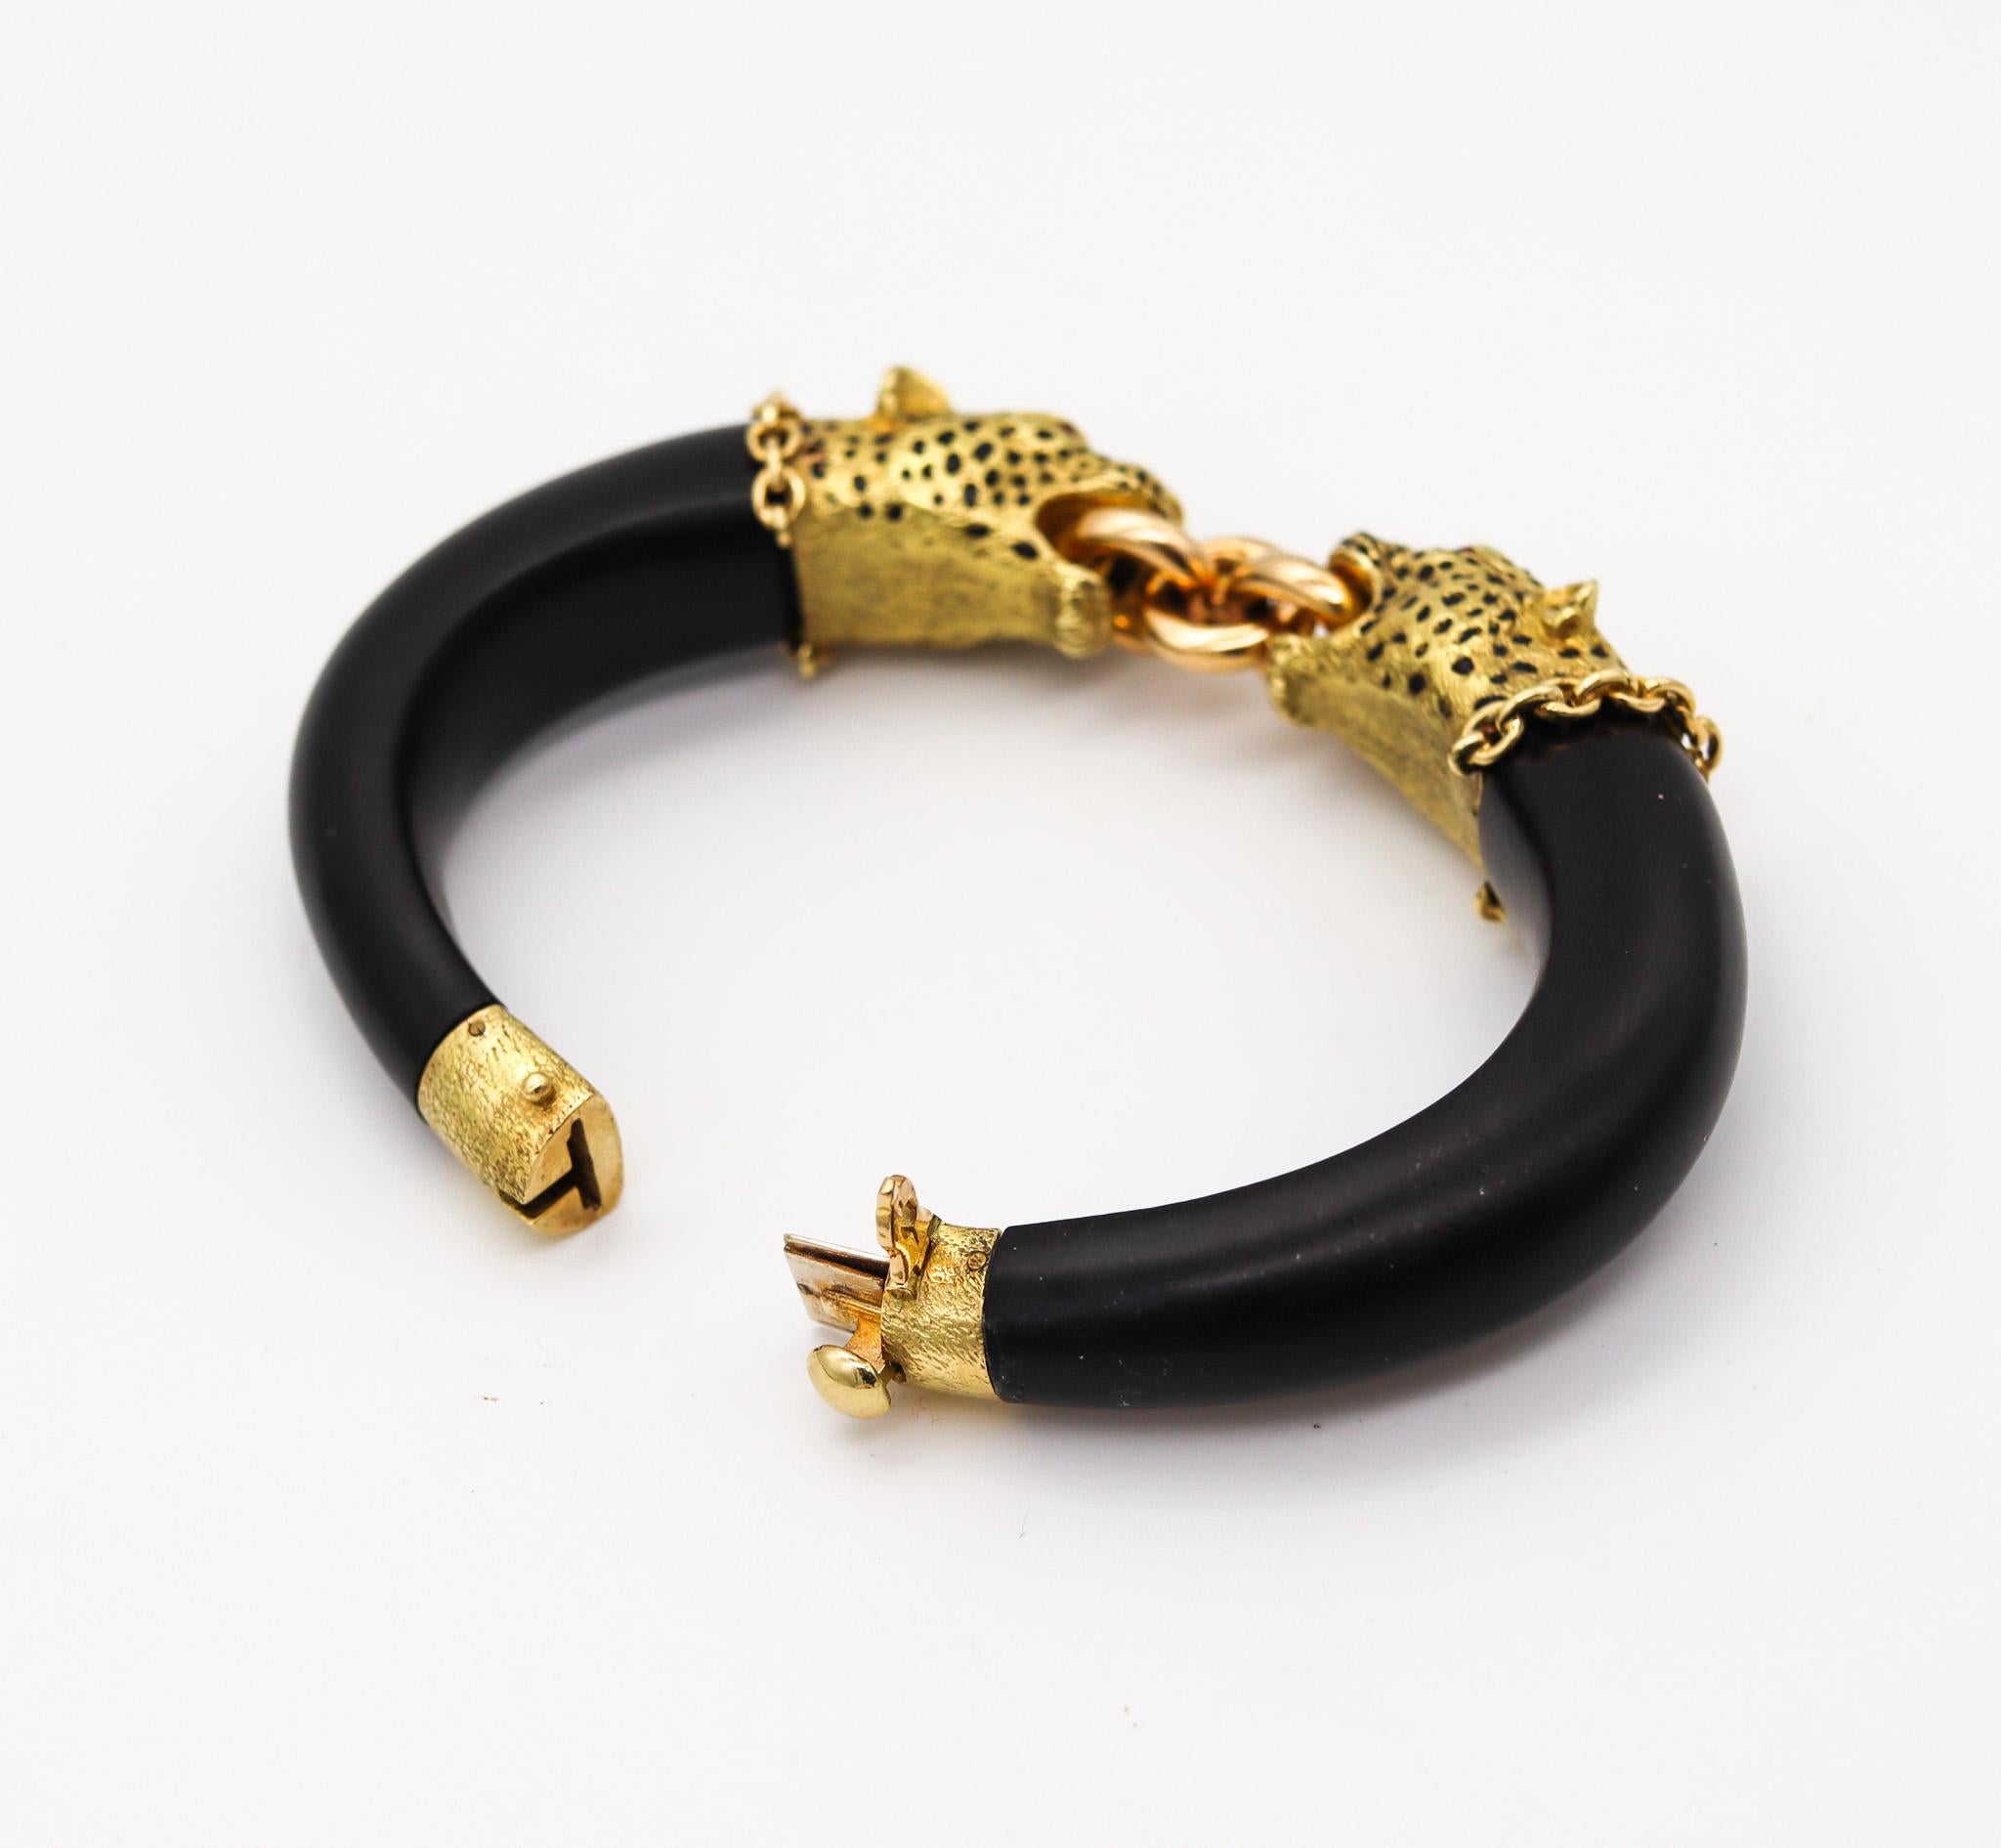 Gay Freres 1960 Paris Feline Enamel and Wood Bracelet in 18kt Gold with Rubies In Excellent Condition For Sale In Miami, FL